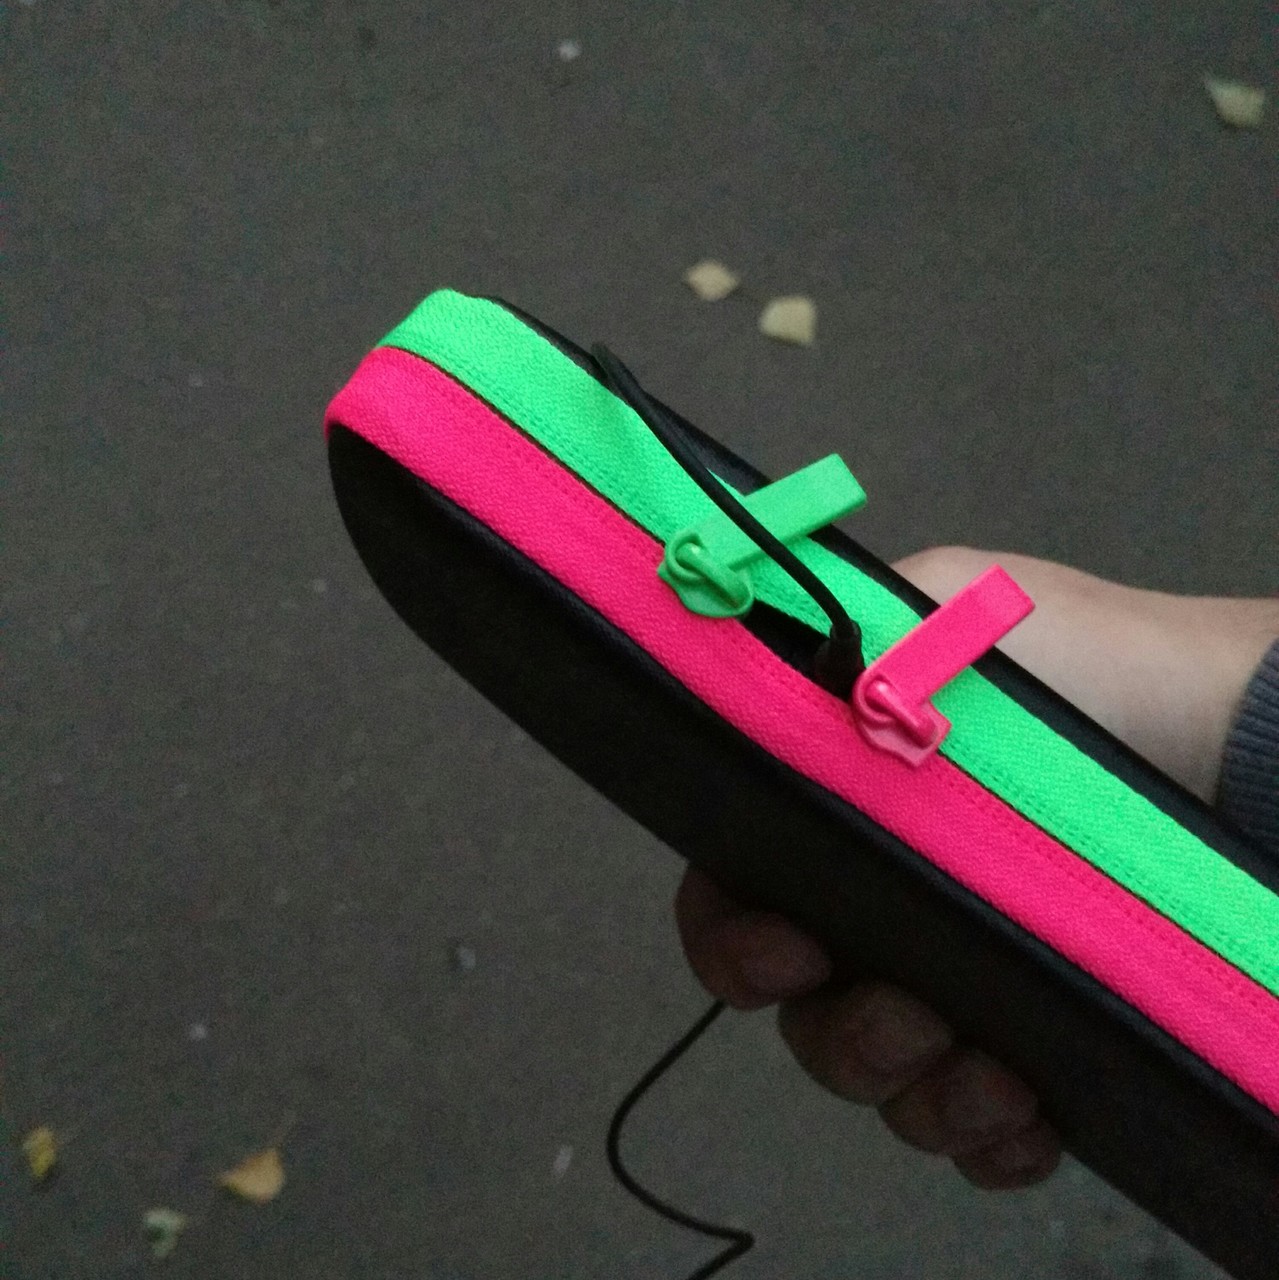 photo of a splatoon 2-styled carrying case for the nintendo switch, with the
zipper being almost completely shut with the exception of a small gap, through
which a headphone jack is connected.